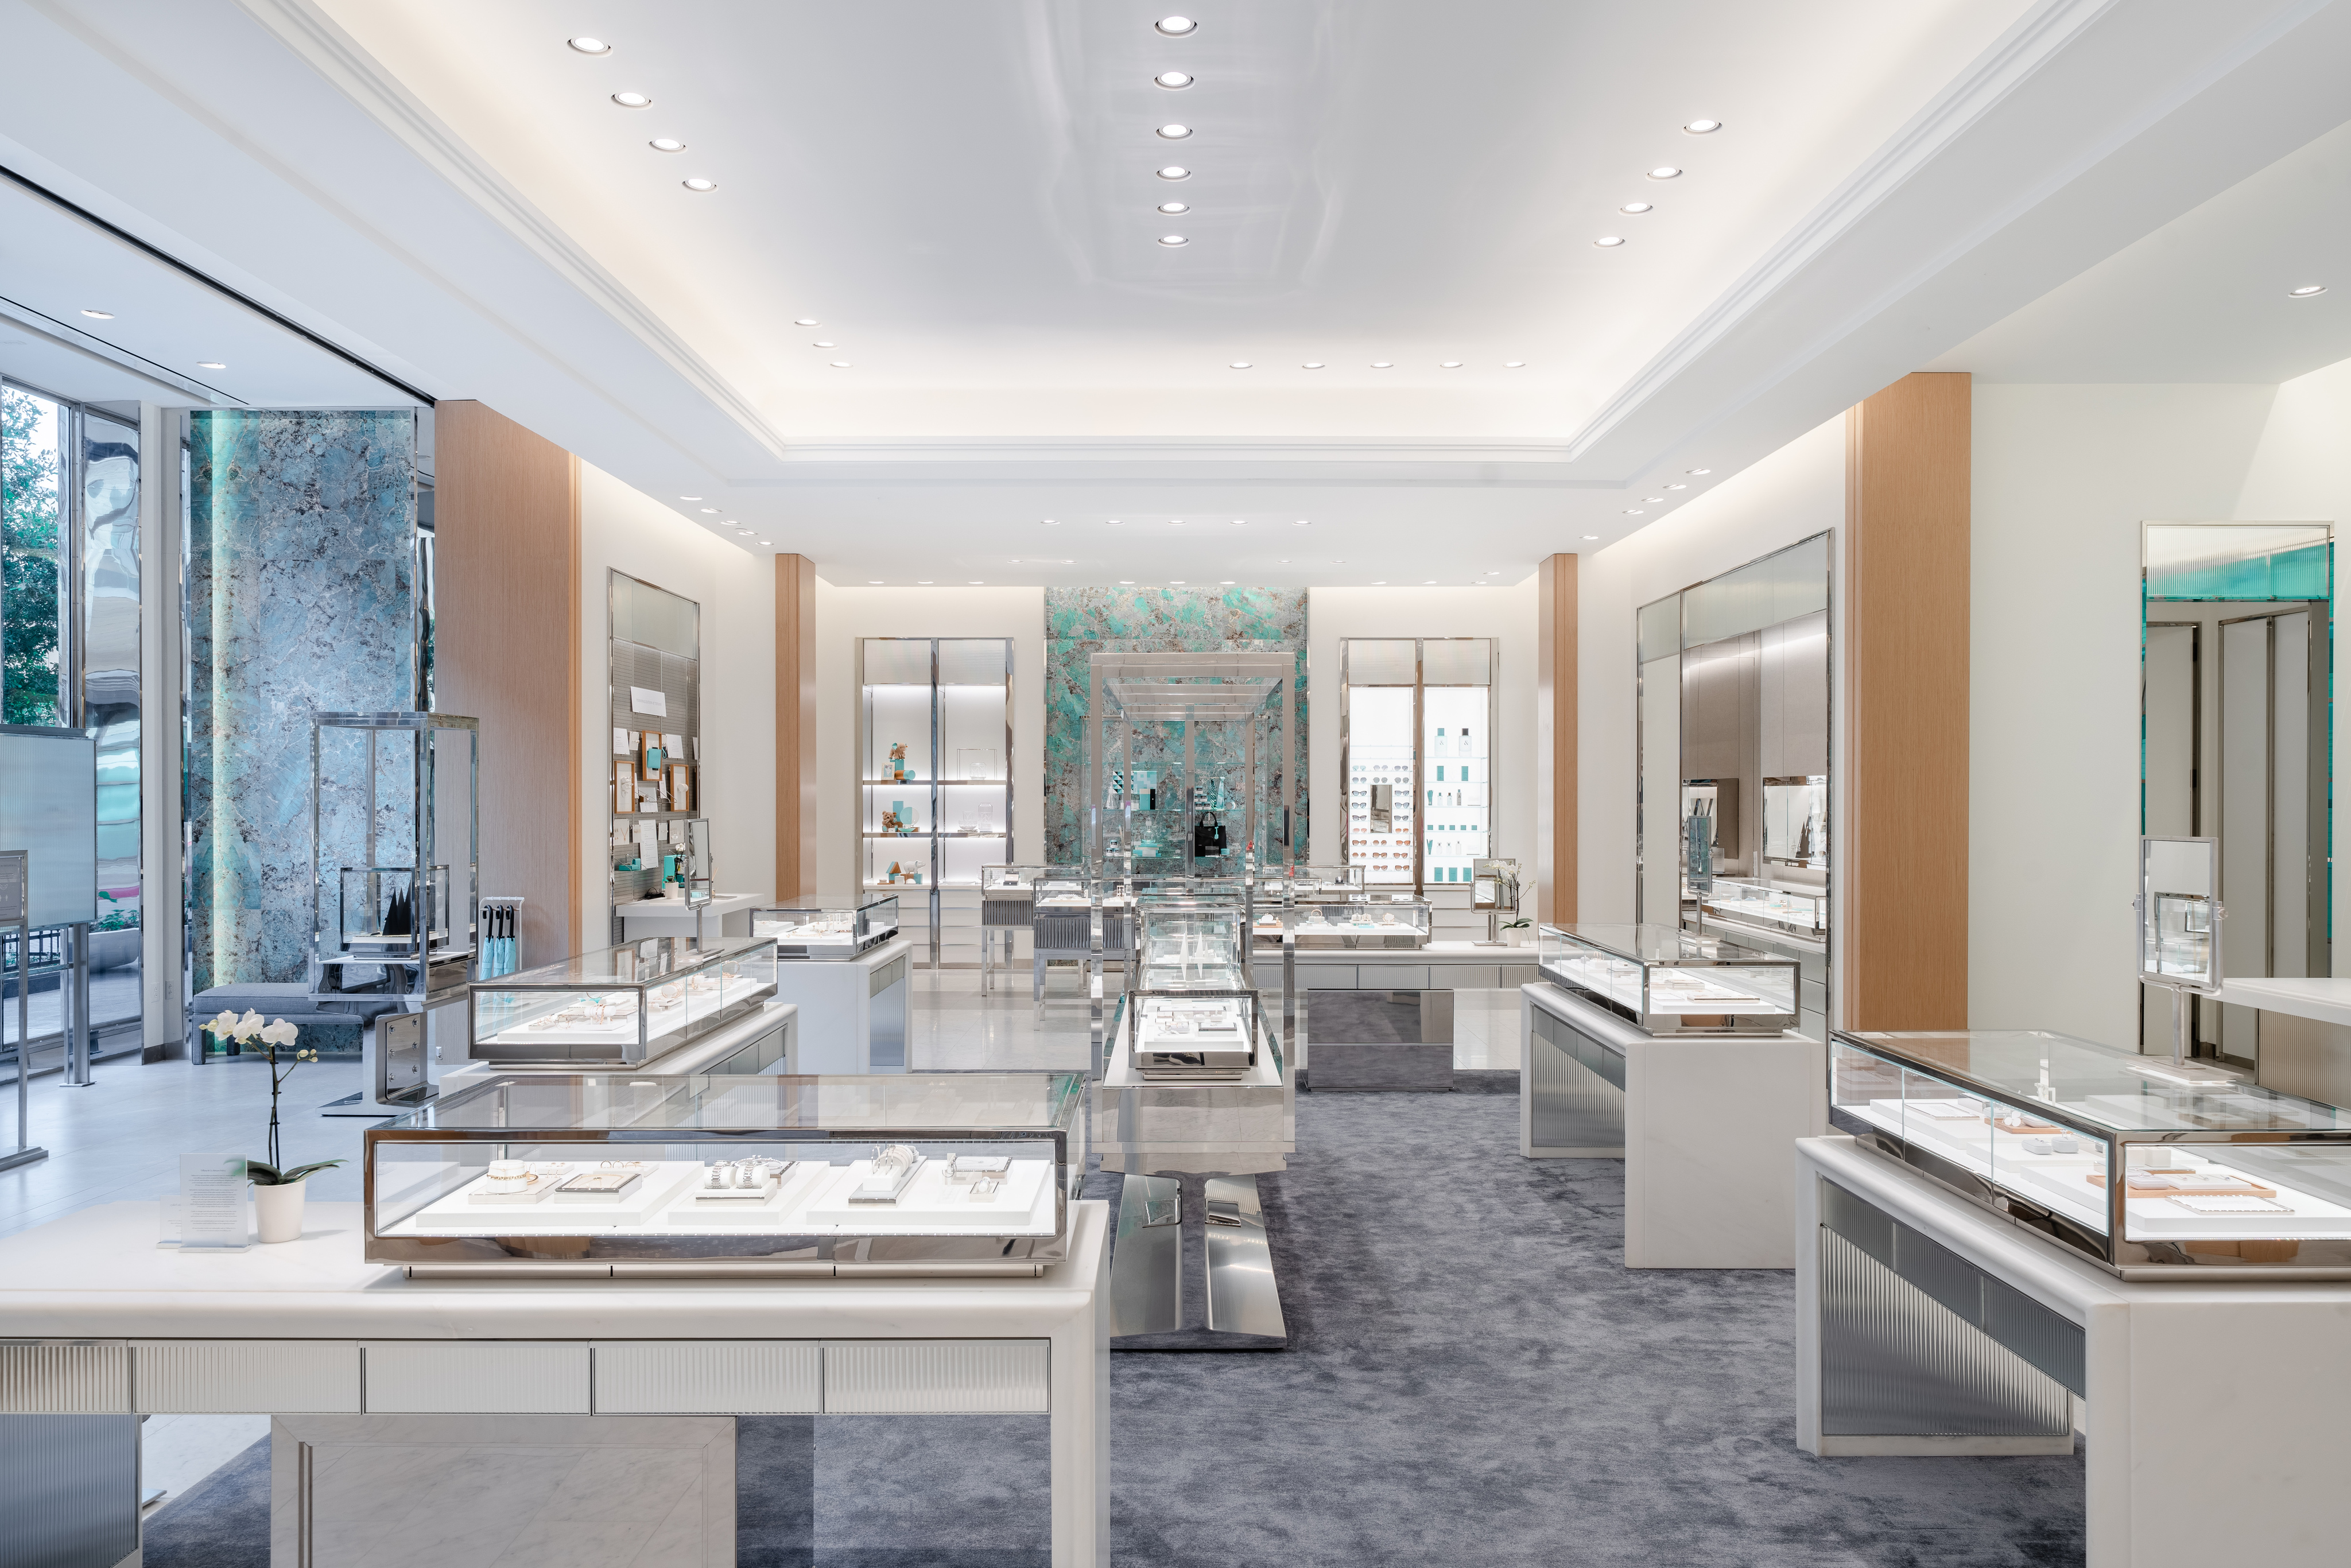 Legacy West's luxury coup continues in Plano with Louis Vuitton and Tiffany  & Co. openings